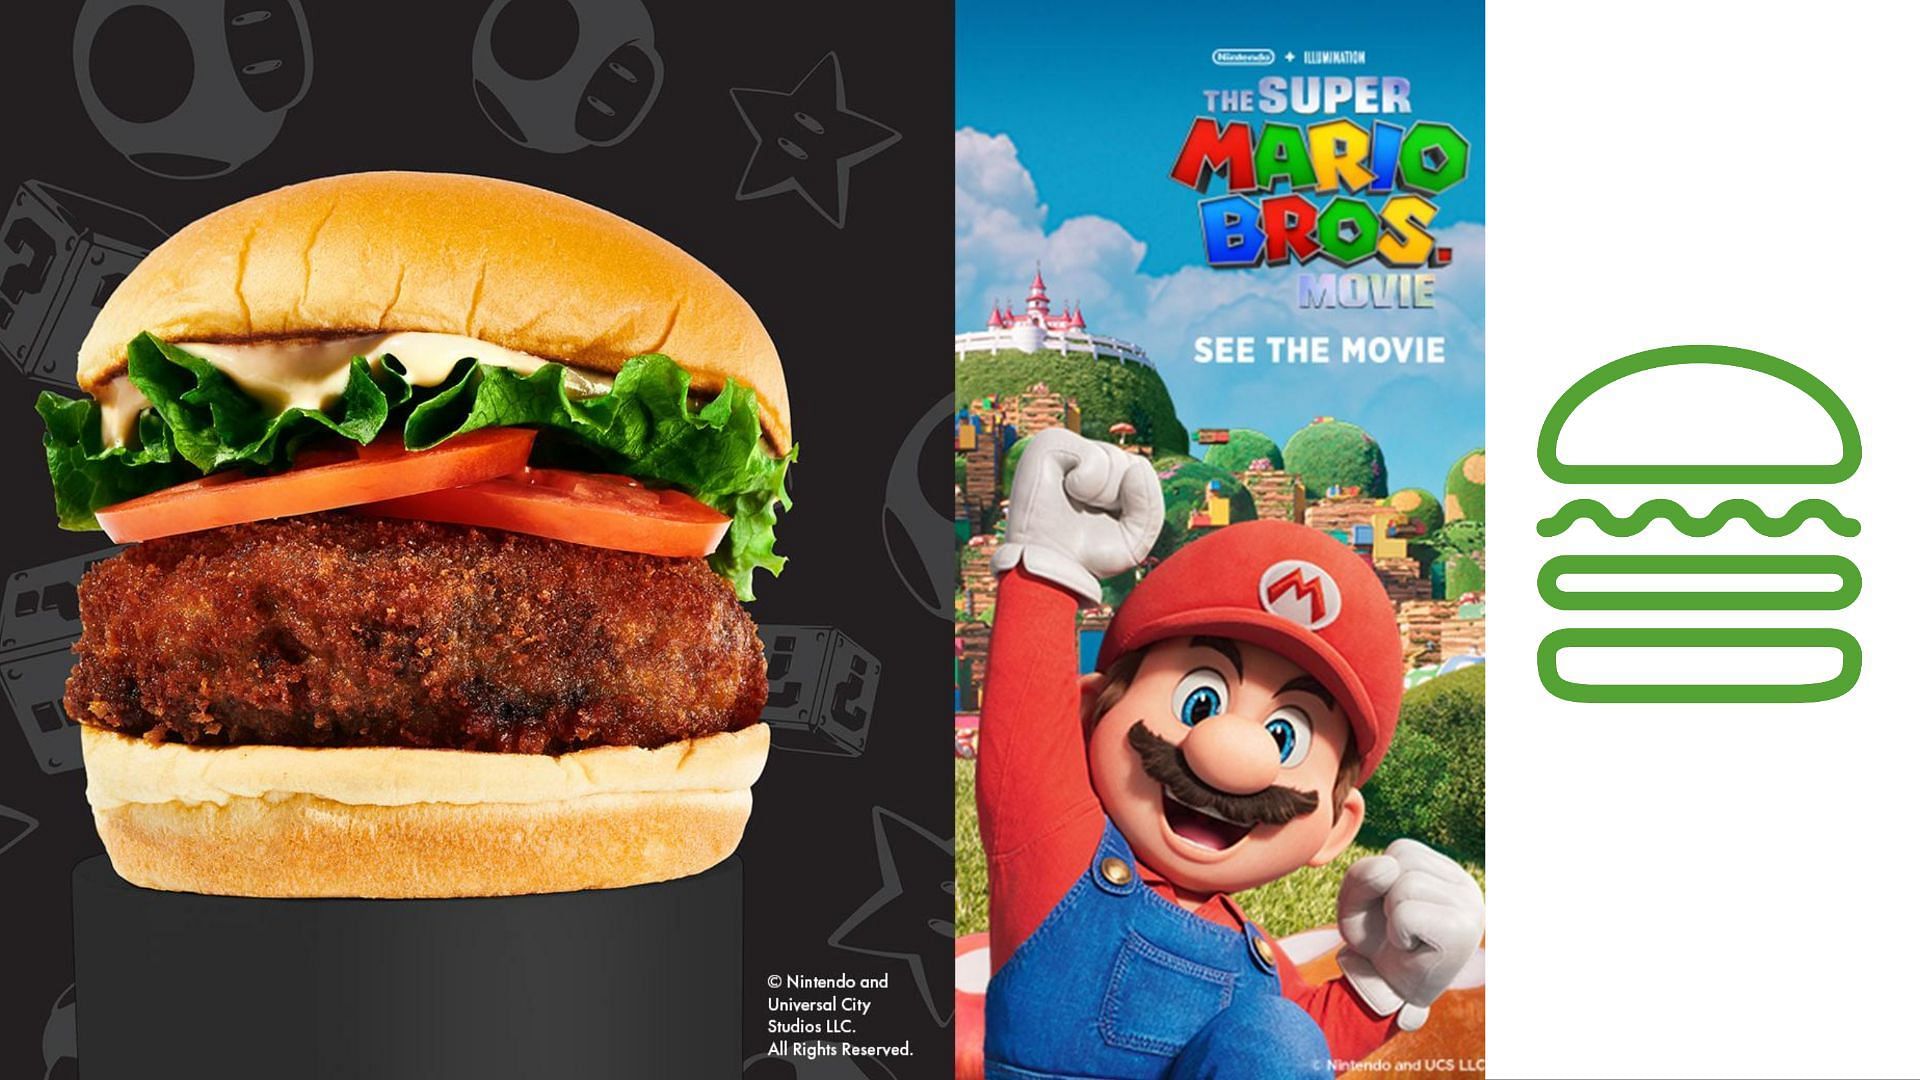 Shake Shack joins hands with Nintendo for a promotional event to celebrate the launch of the upcoming The Super Mario Bros. Movie (Image via Shake Shack/Nintendo)